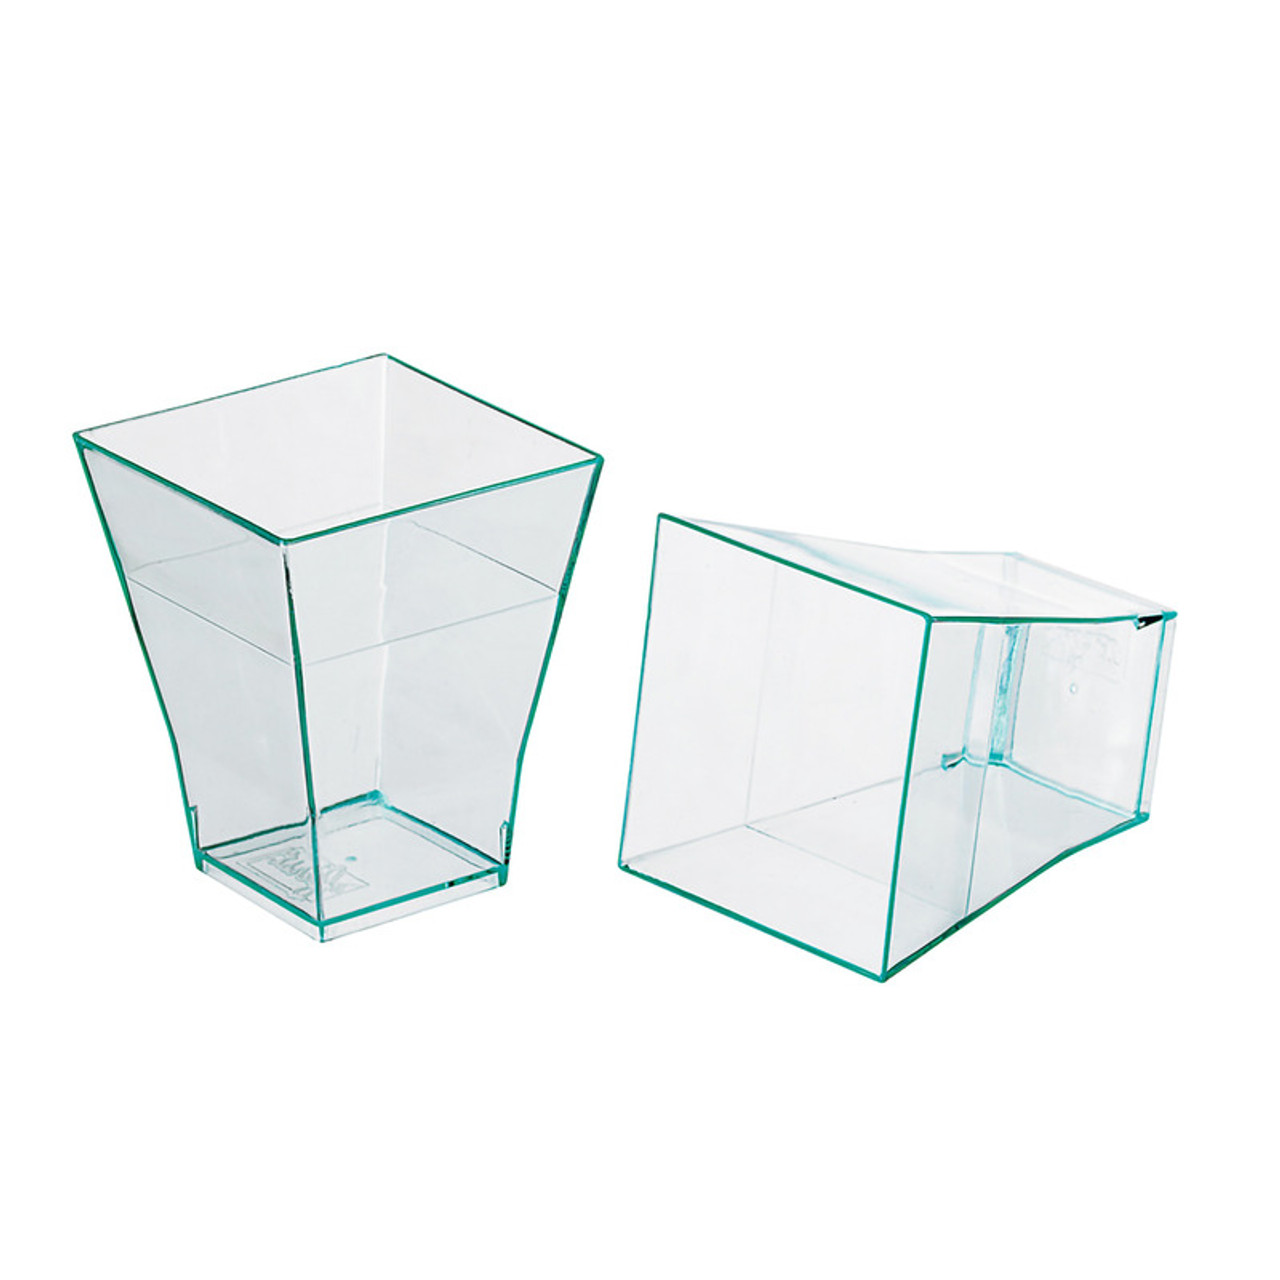 209MBTAITIV Clear Green Square Cup 2oz 1.7 x 1.7 x 2.1in - 30 pcs